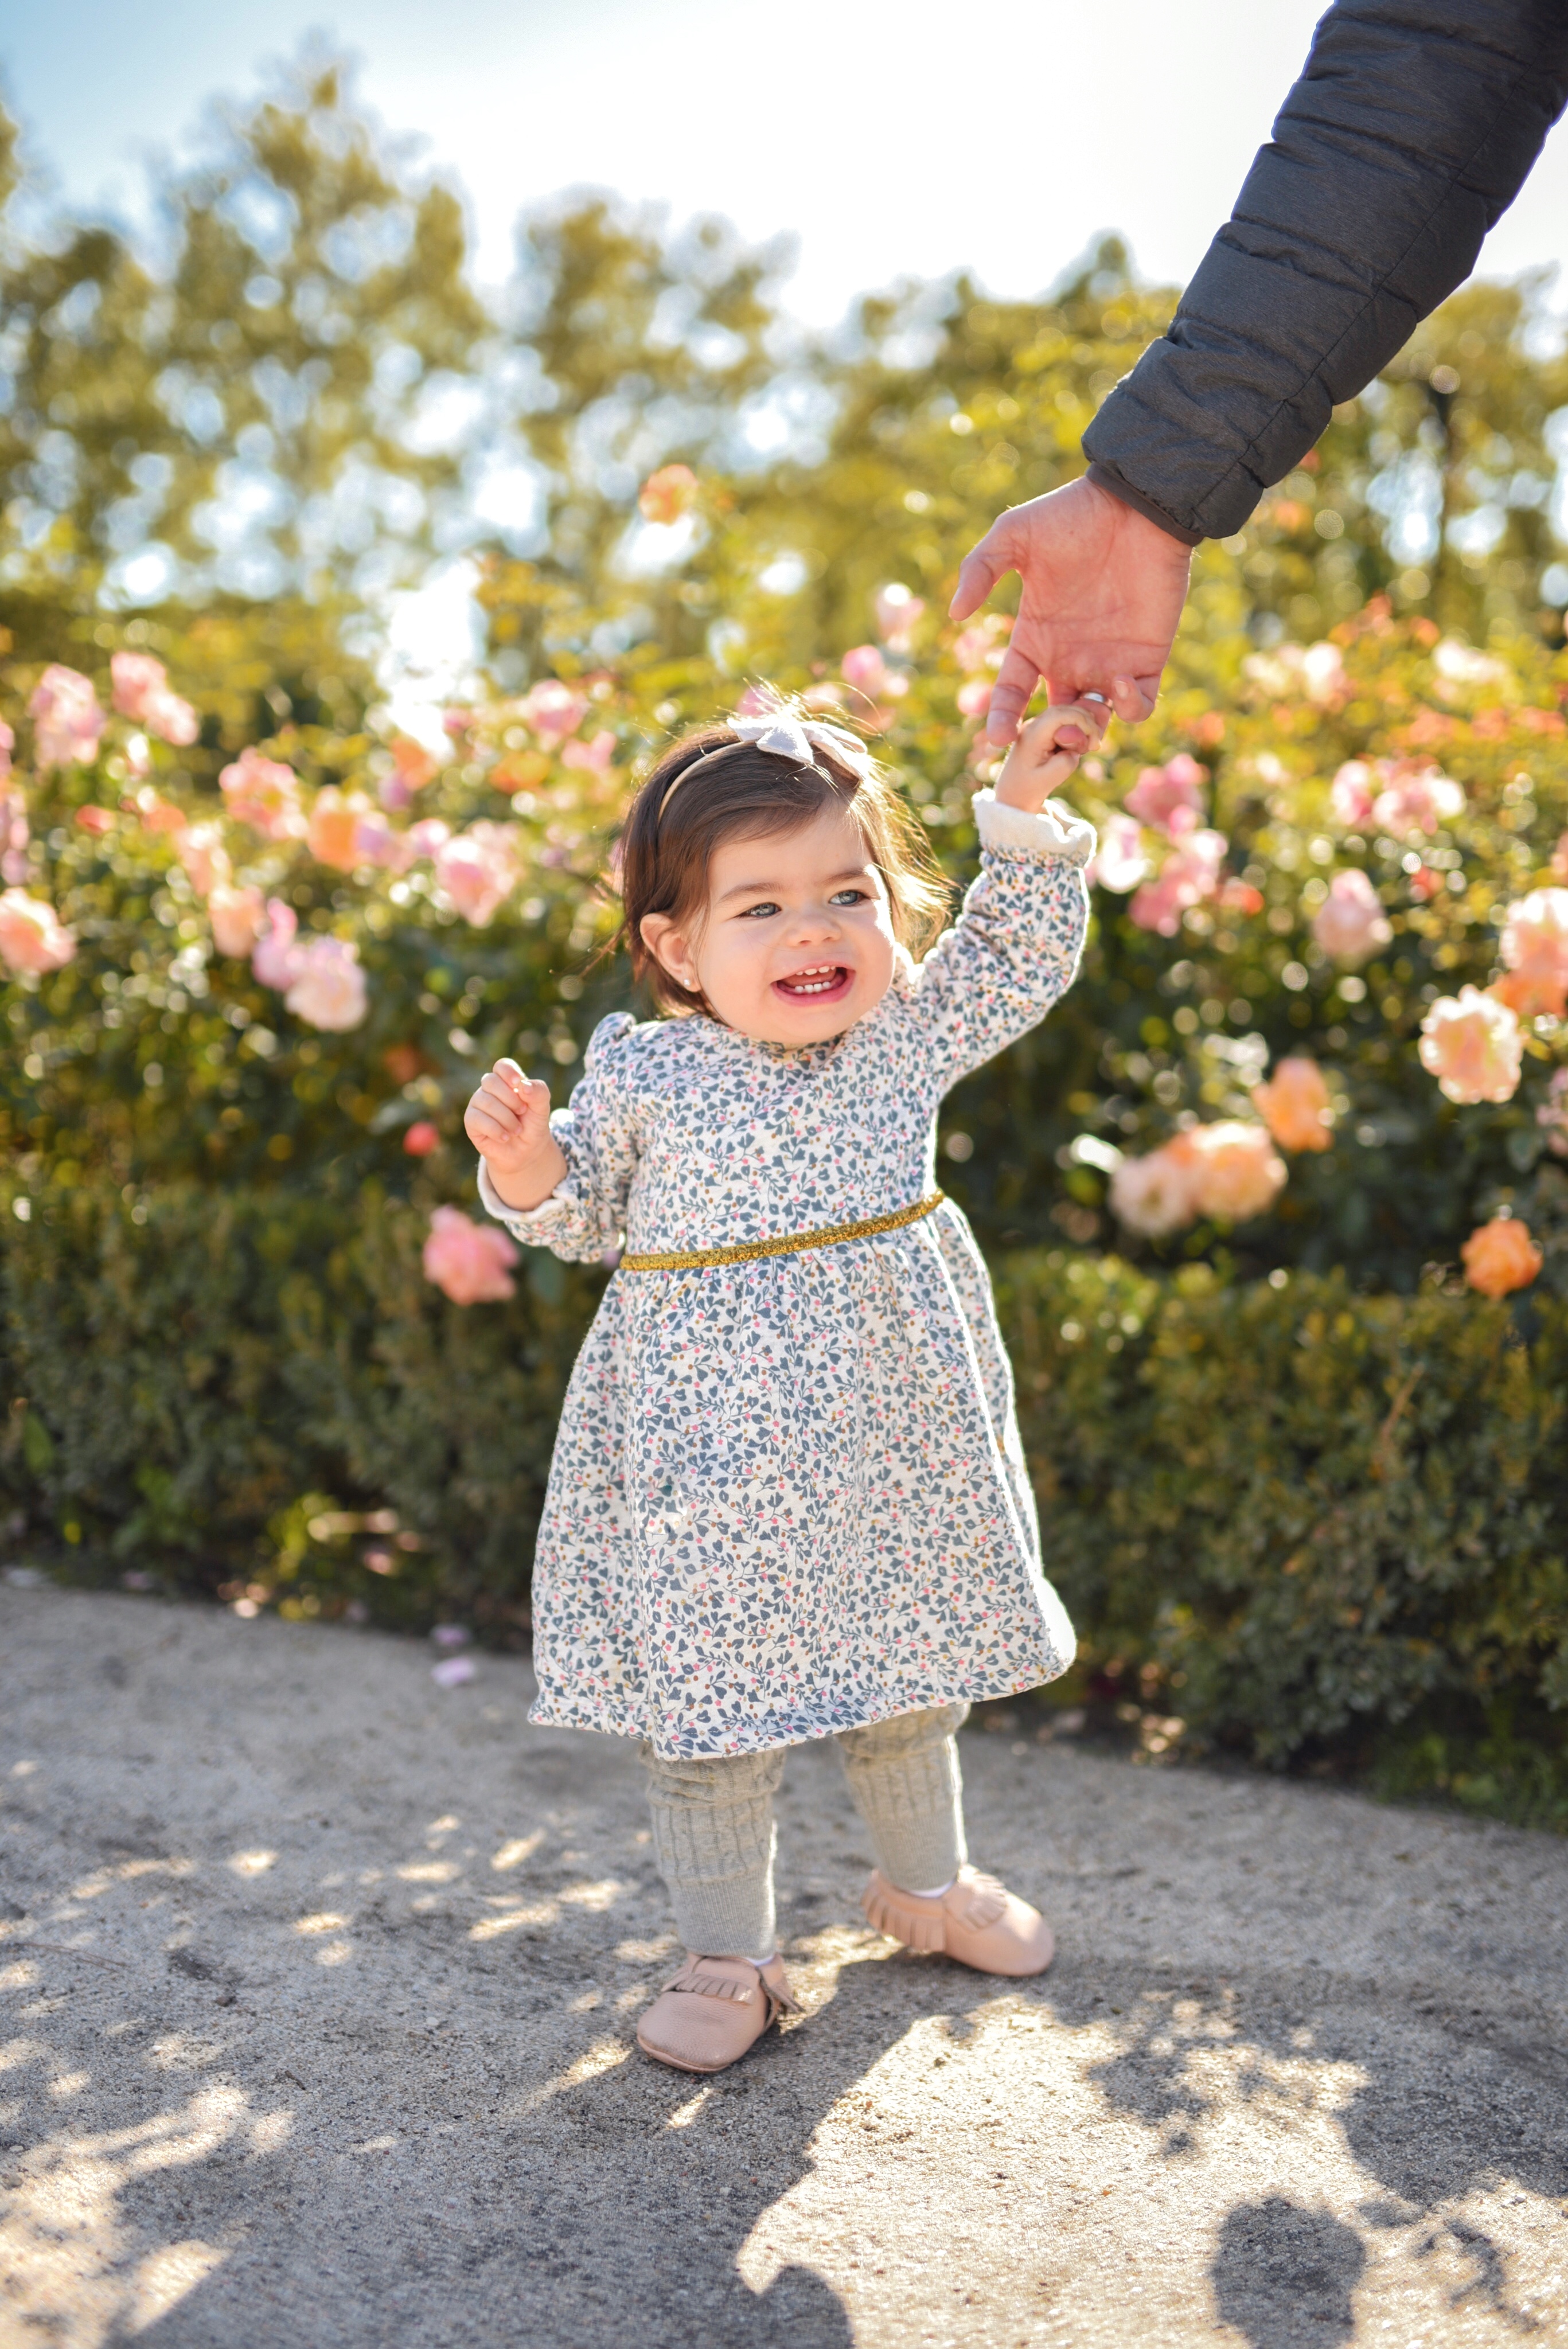 My baby Sofia Jaramillo wearing a floral dress via Carter's, Gap baby knit leggings and pink moccasins via Amazon